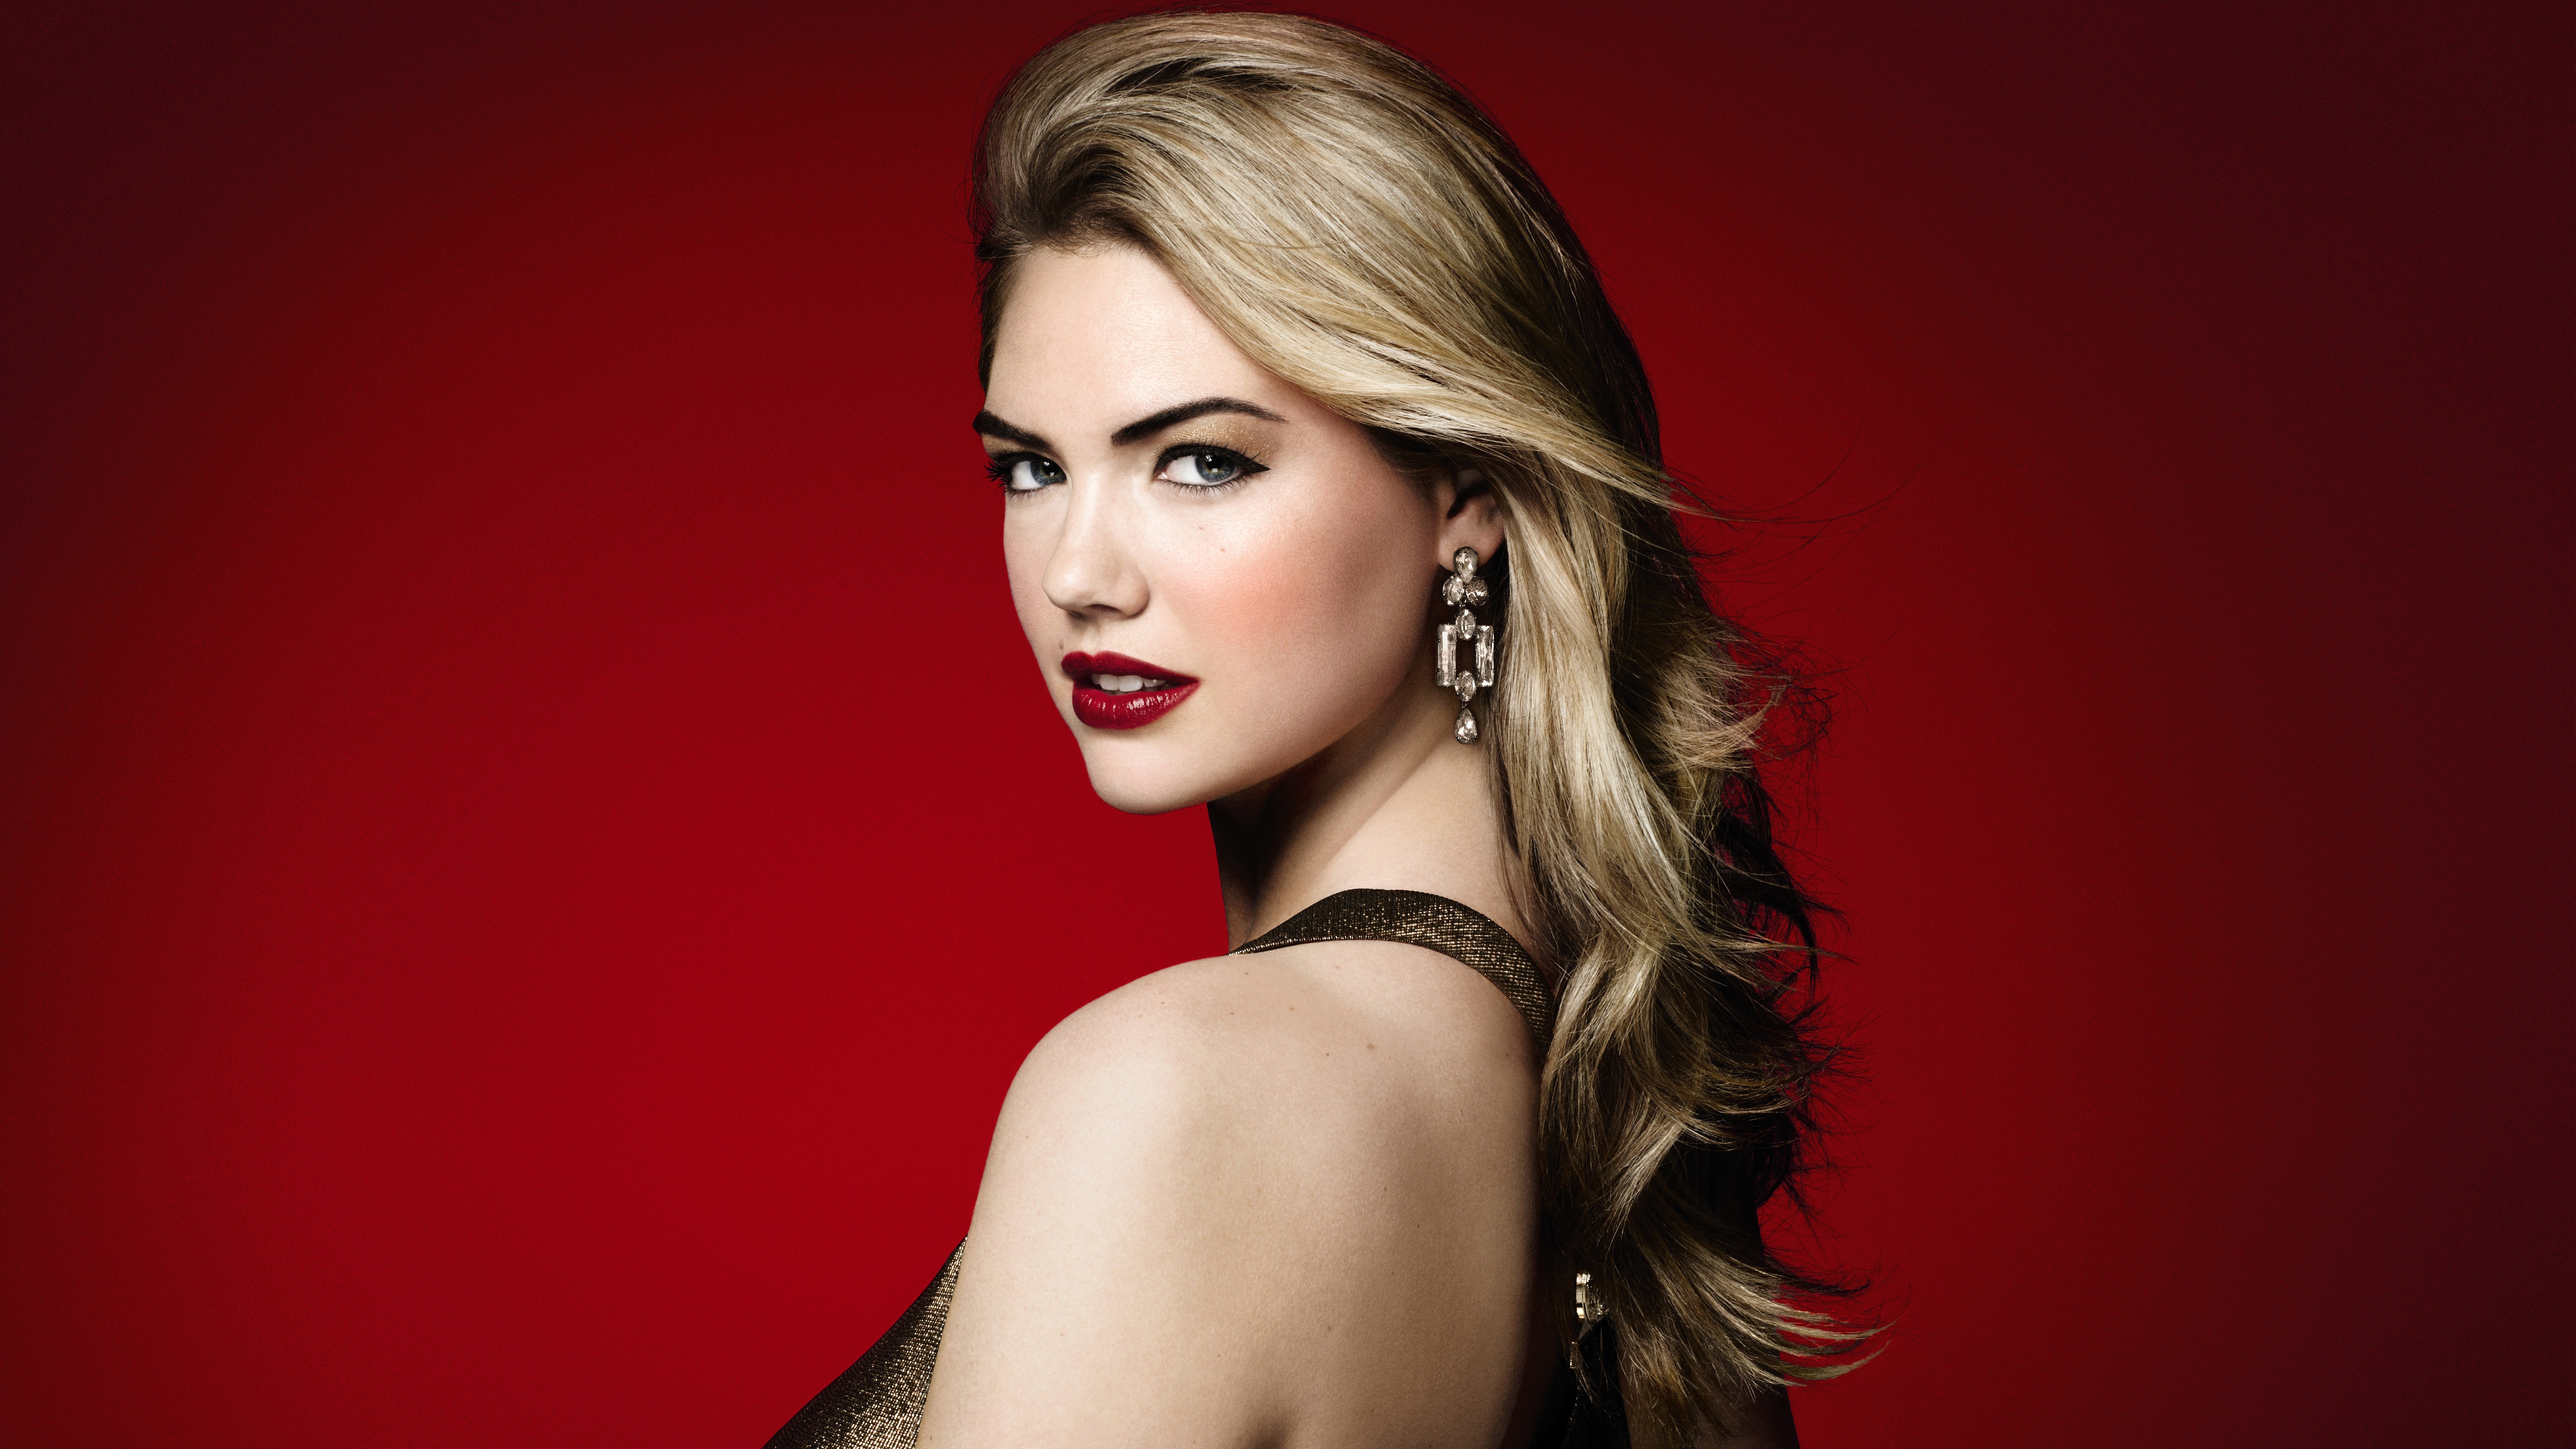 People 7680x4320 women Kate Upton looking at viewer blonde long hair earring red lipstick glamour red background classy gray eyes dress simple background model Australian women women indoors indoors studio makeup long earrings face portrait